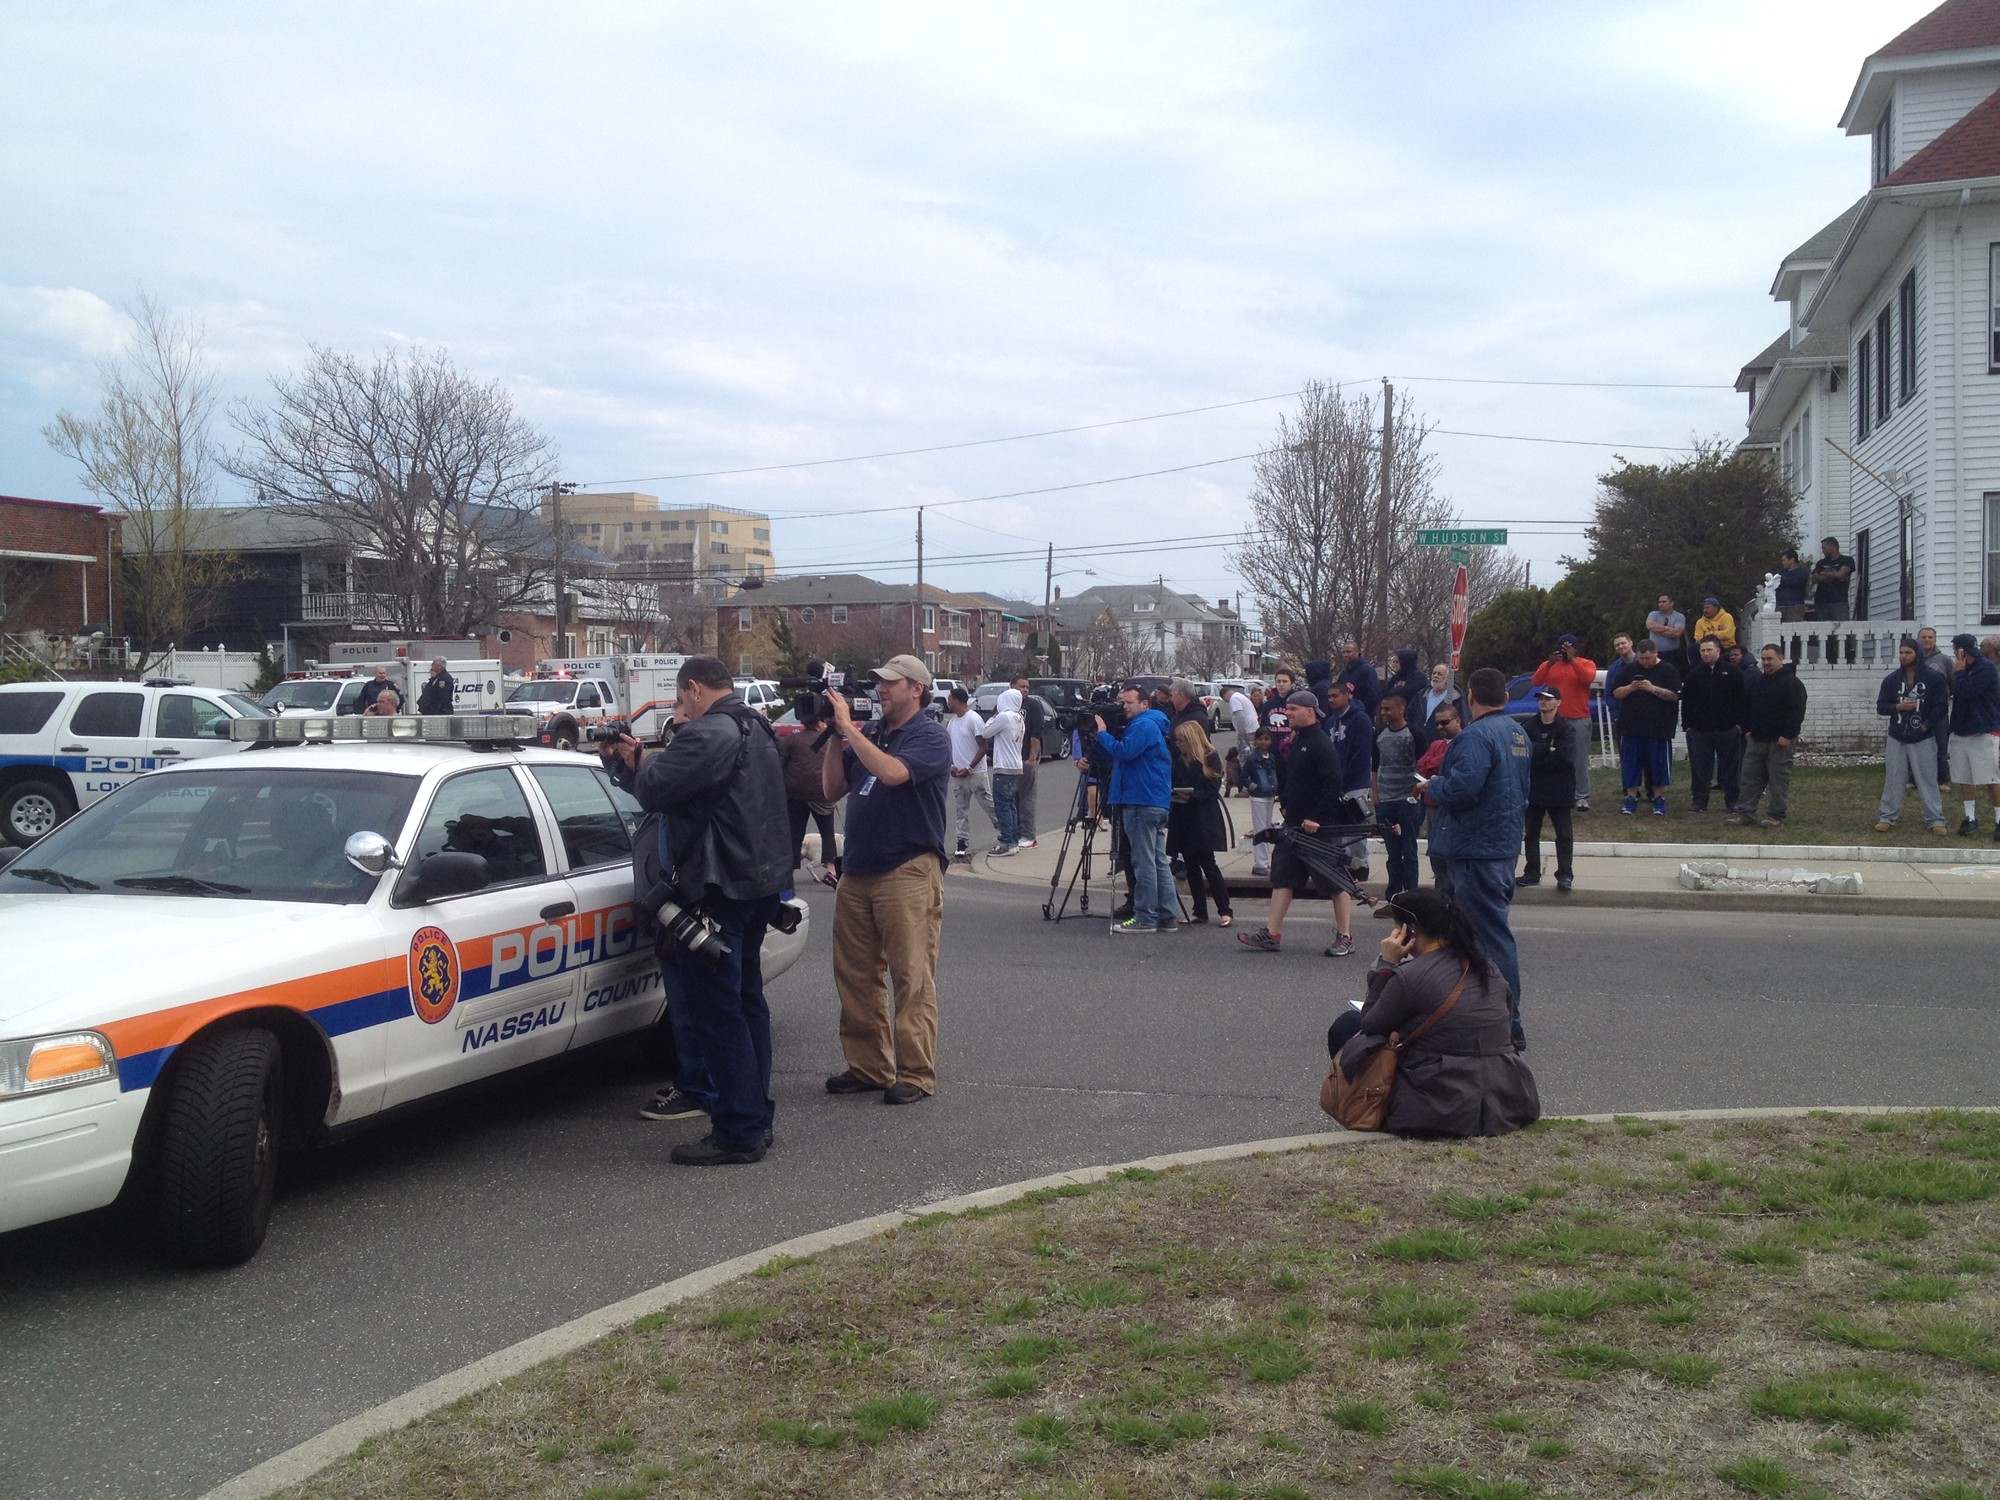 Laurelton Boulevard was teeming with news media on Tuesday, as residents and bystanders milled about near the scene.